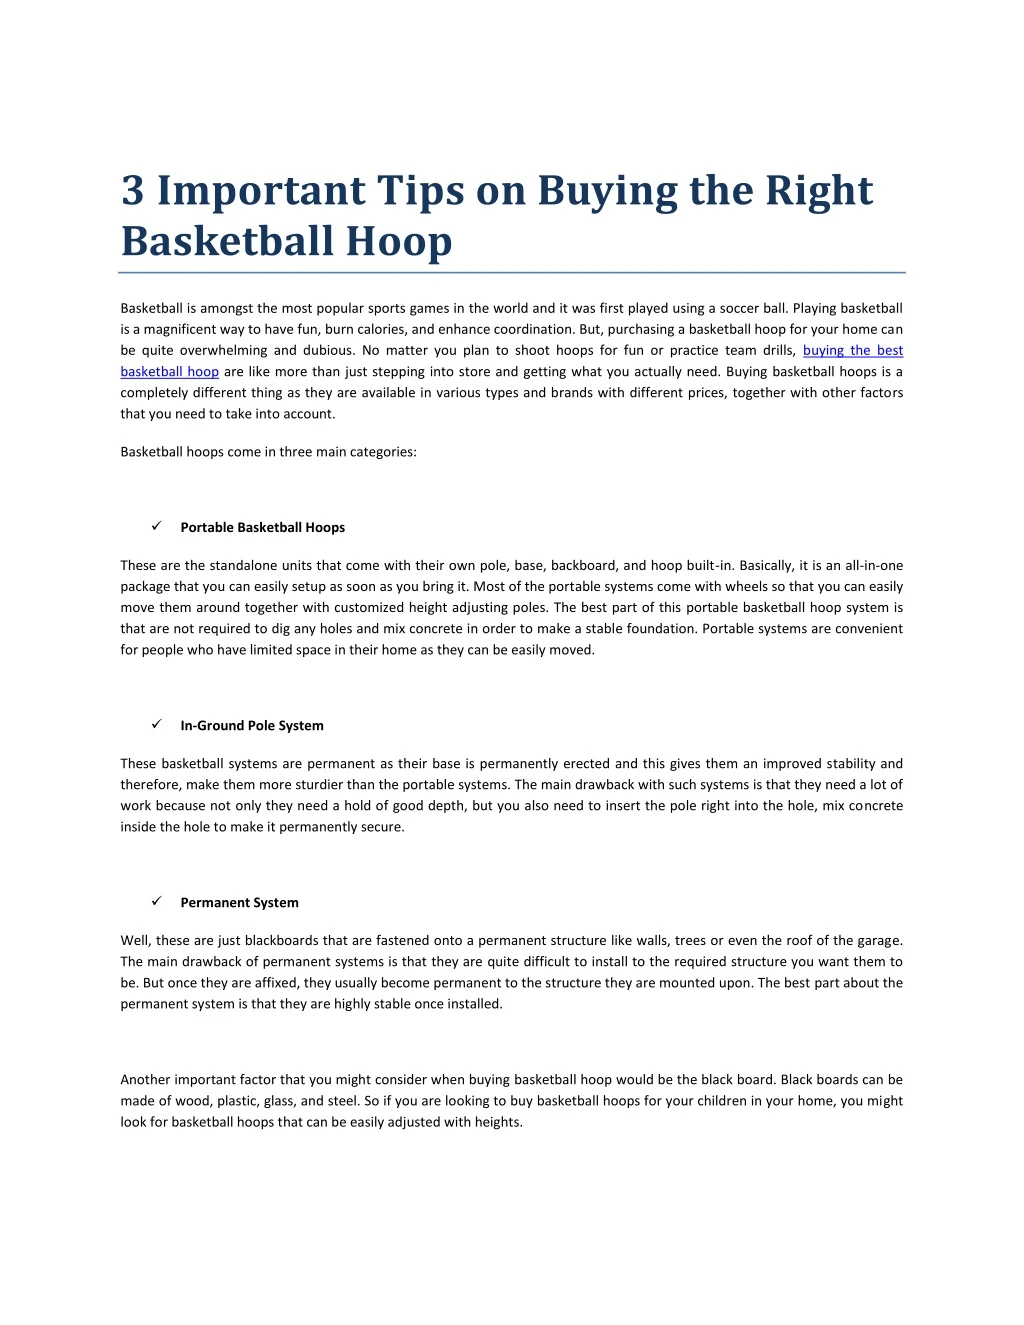 3 important tips on buying the right basketball